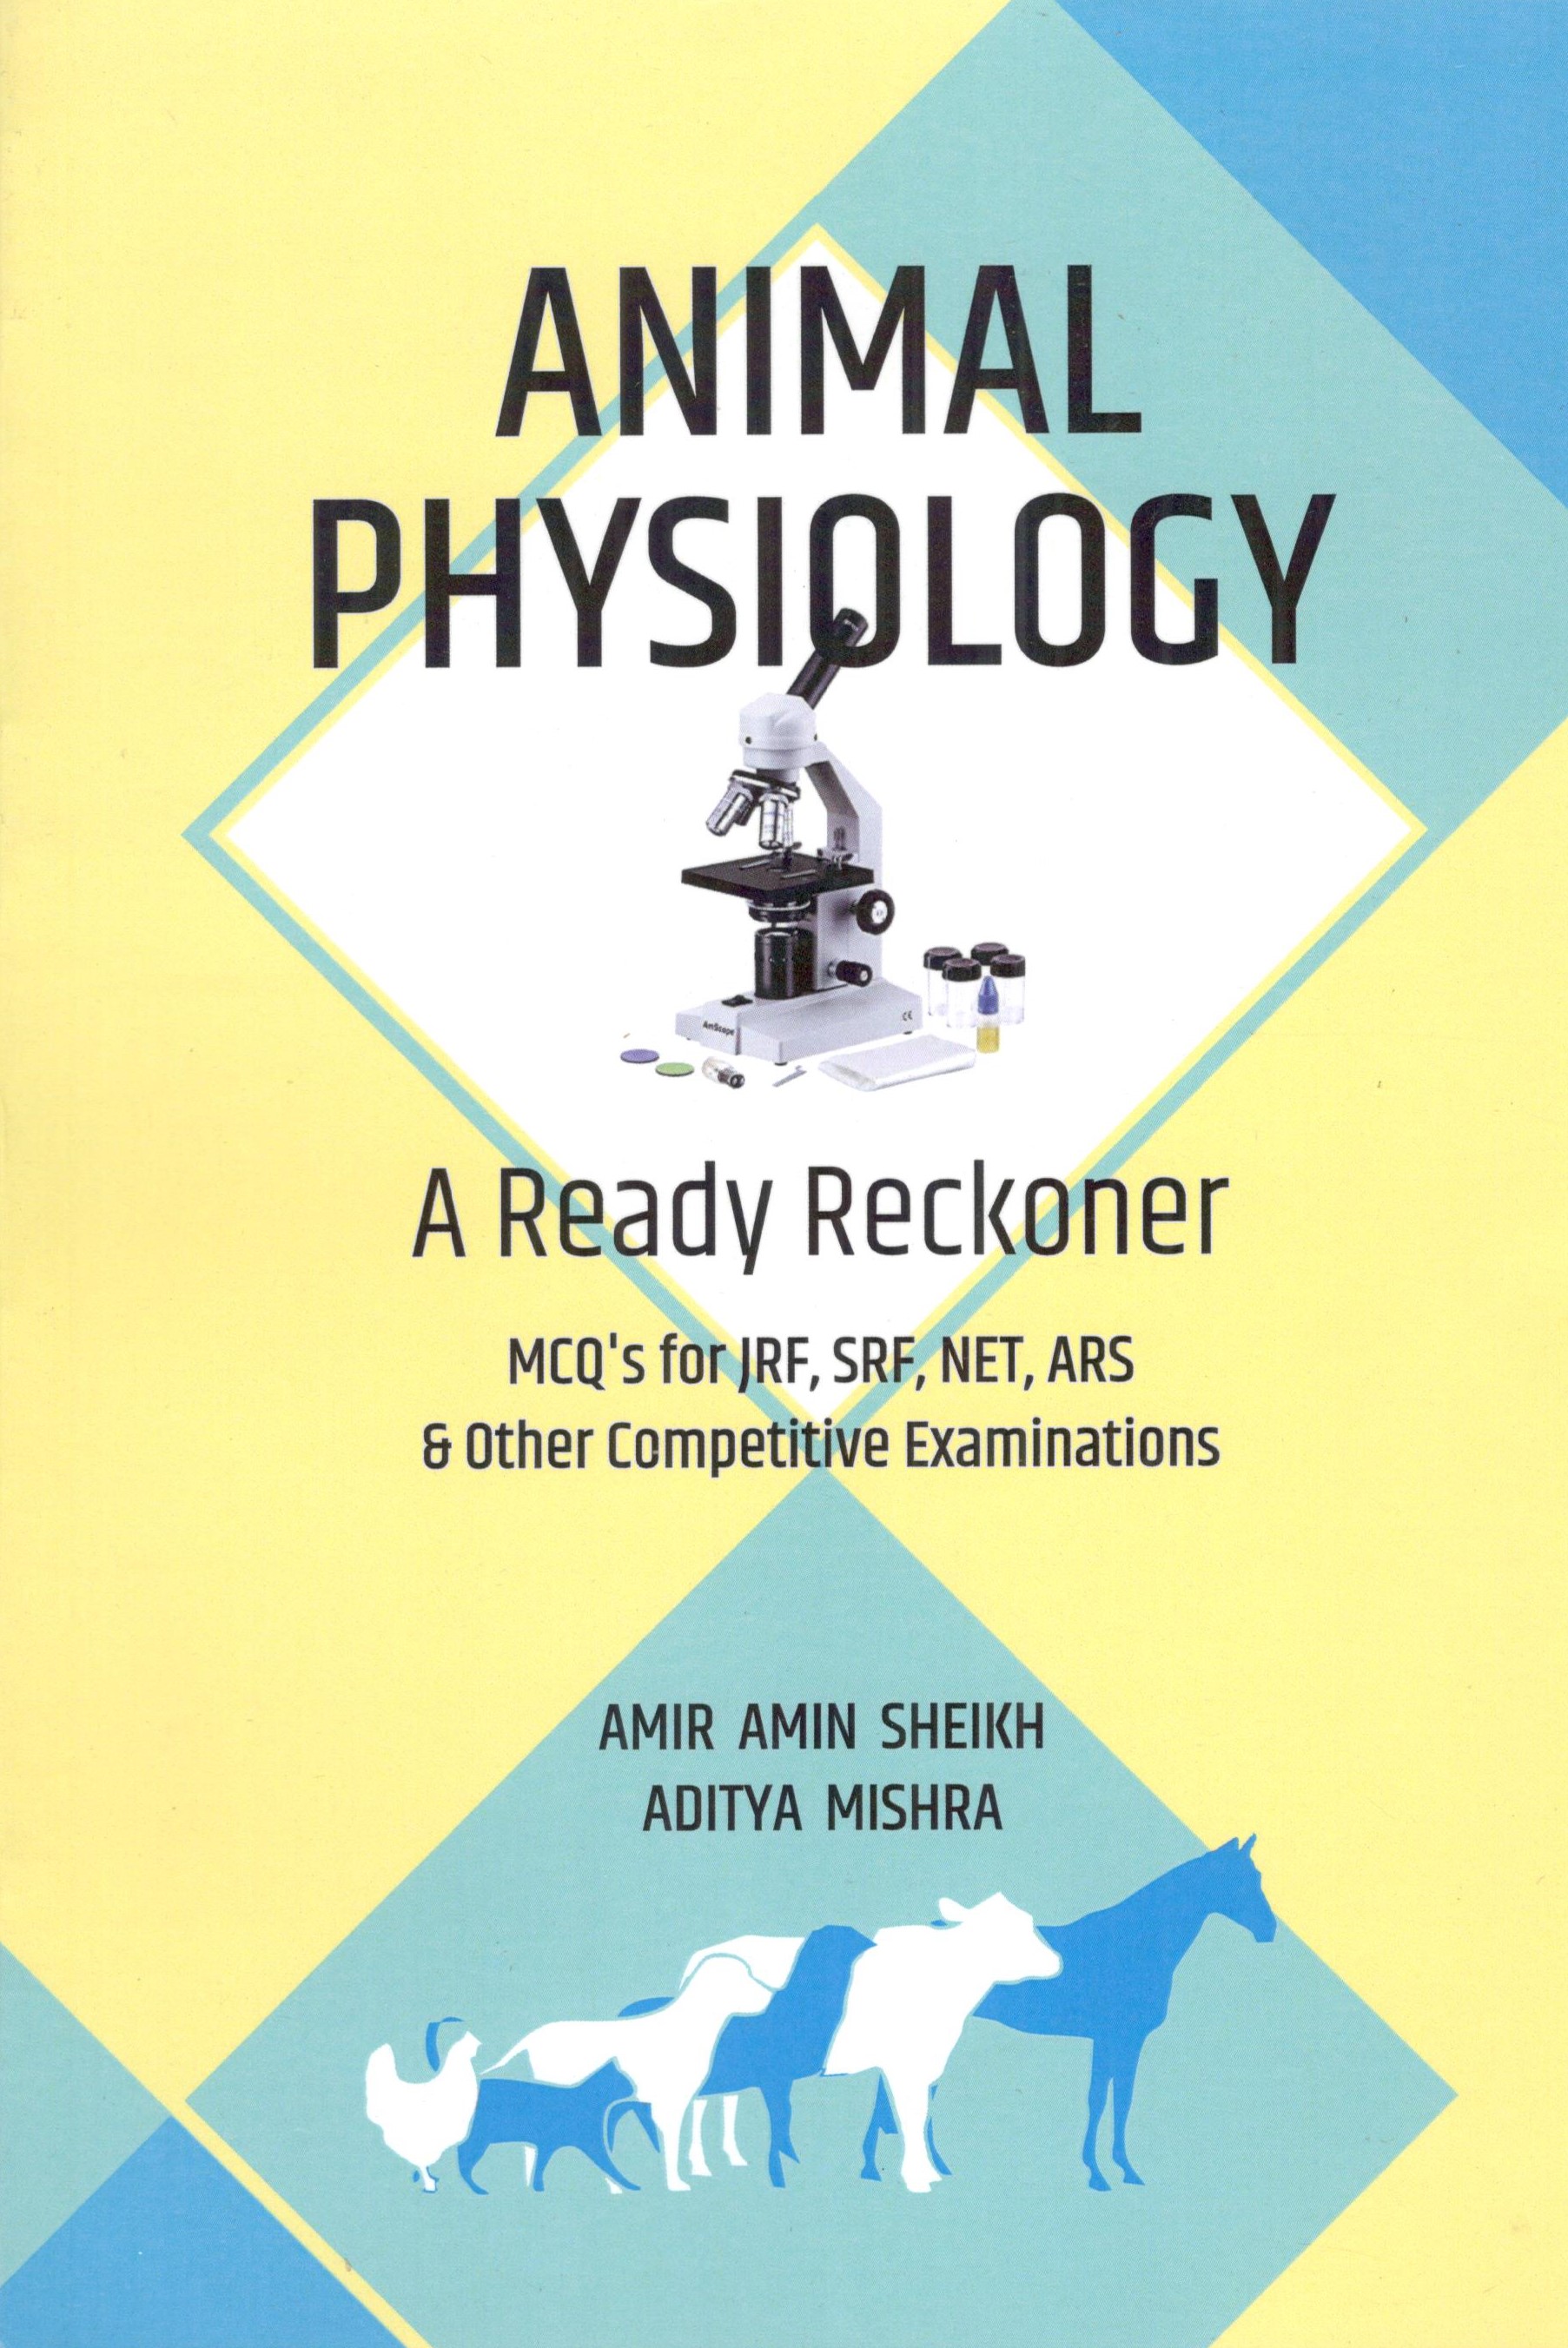 Animal Physiology A Ready Reckoner MCQ'S FOR JRF, SRF, NET, ARS & OTHER COMPETITIVE EXAMINATIONS